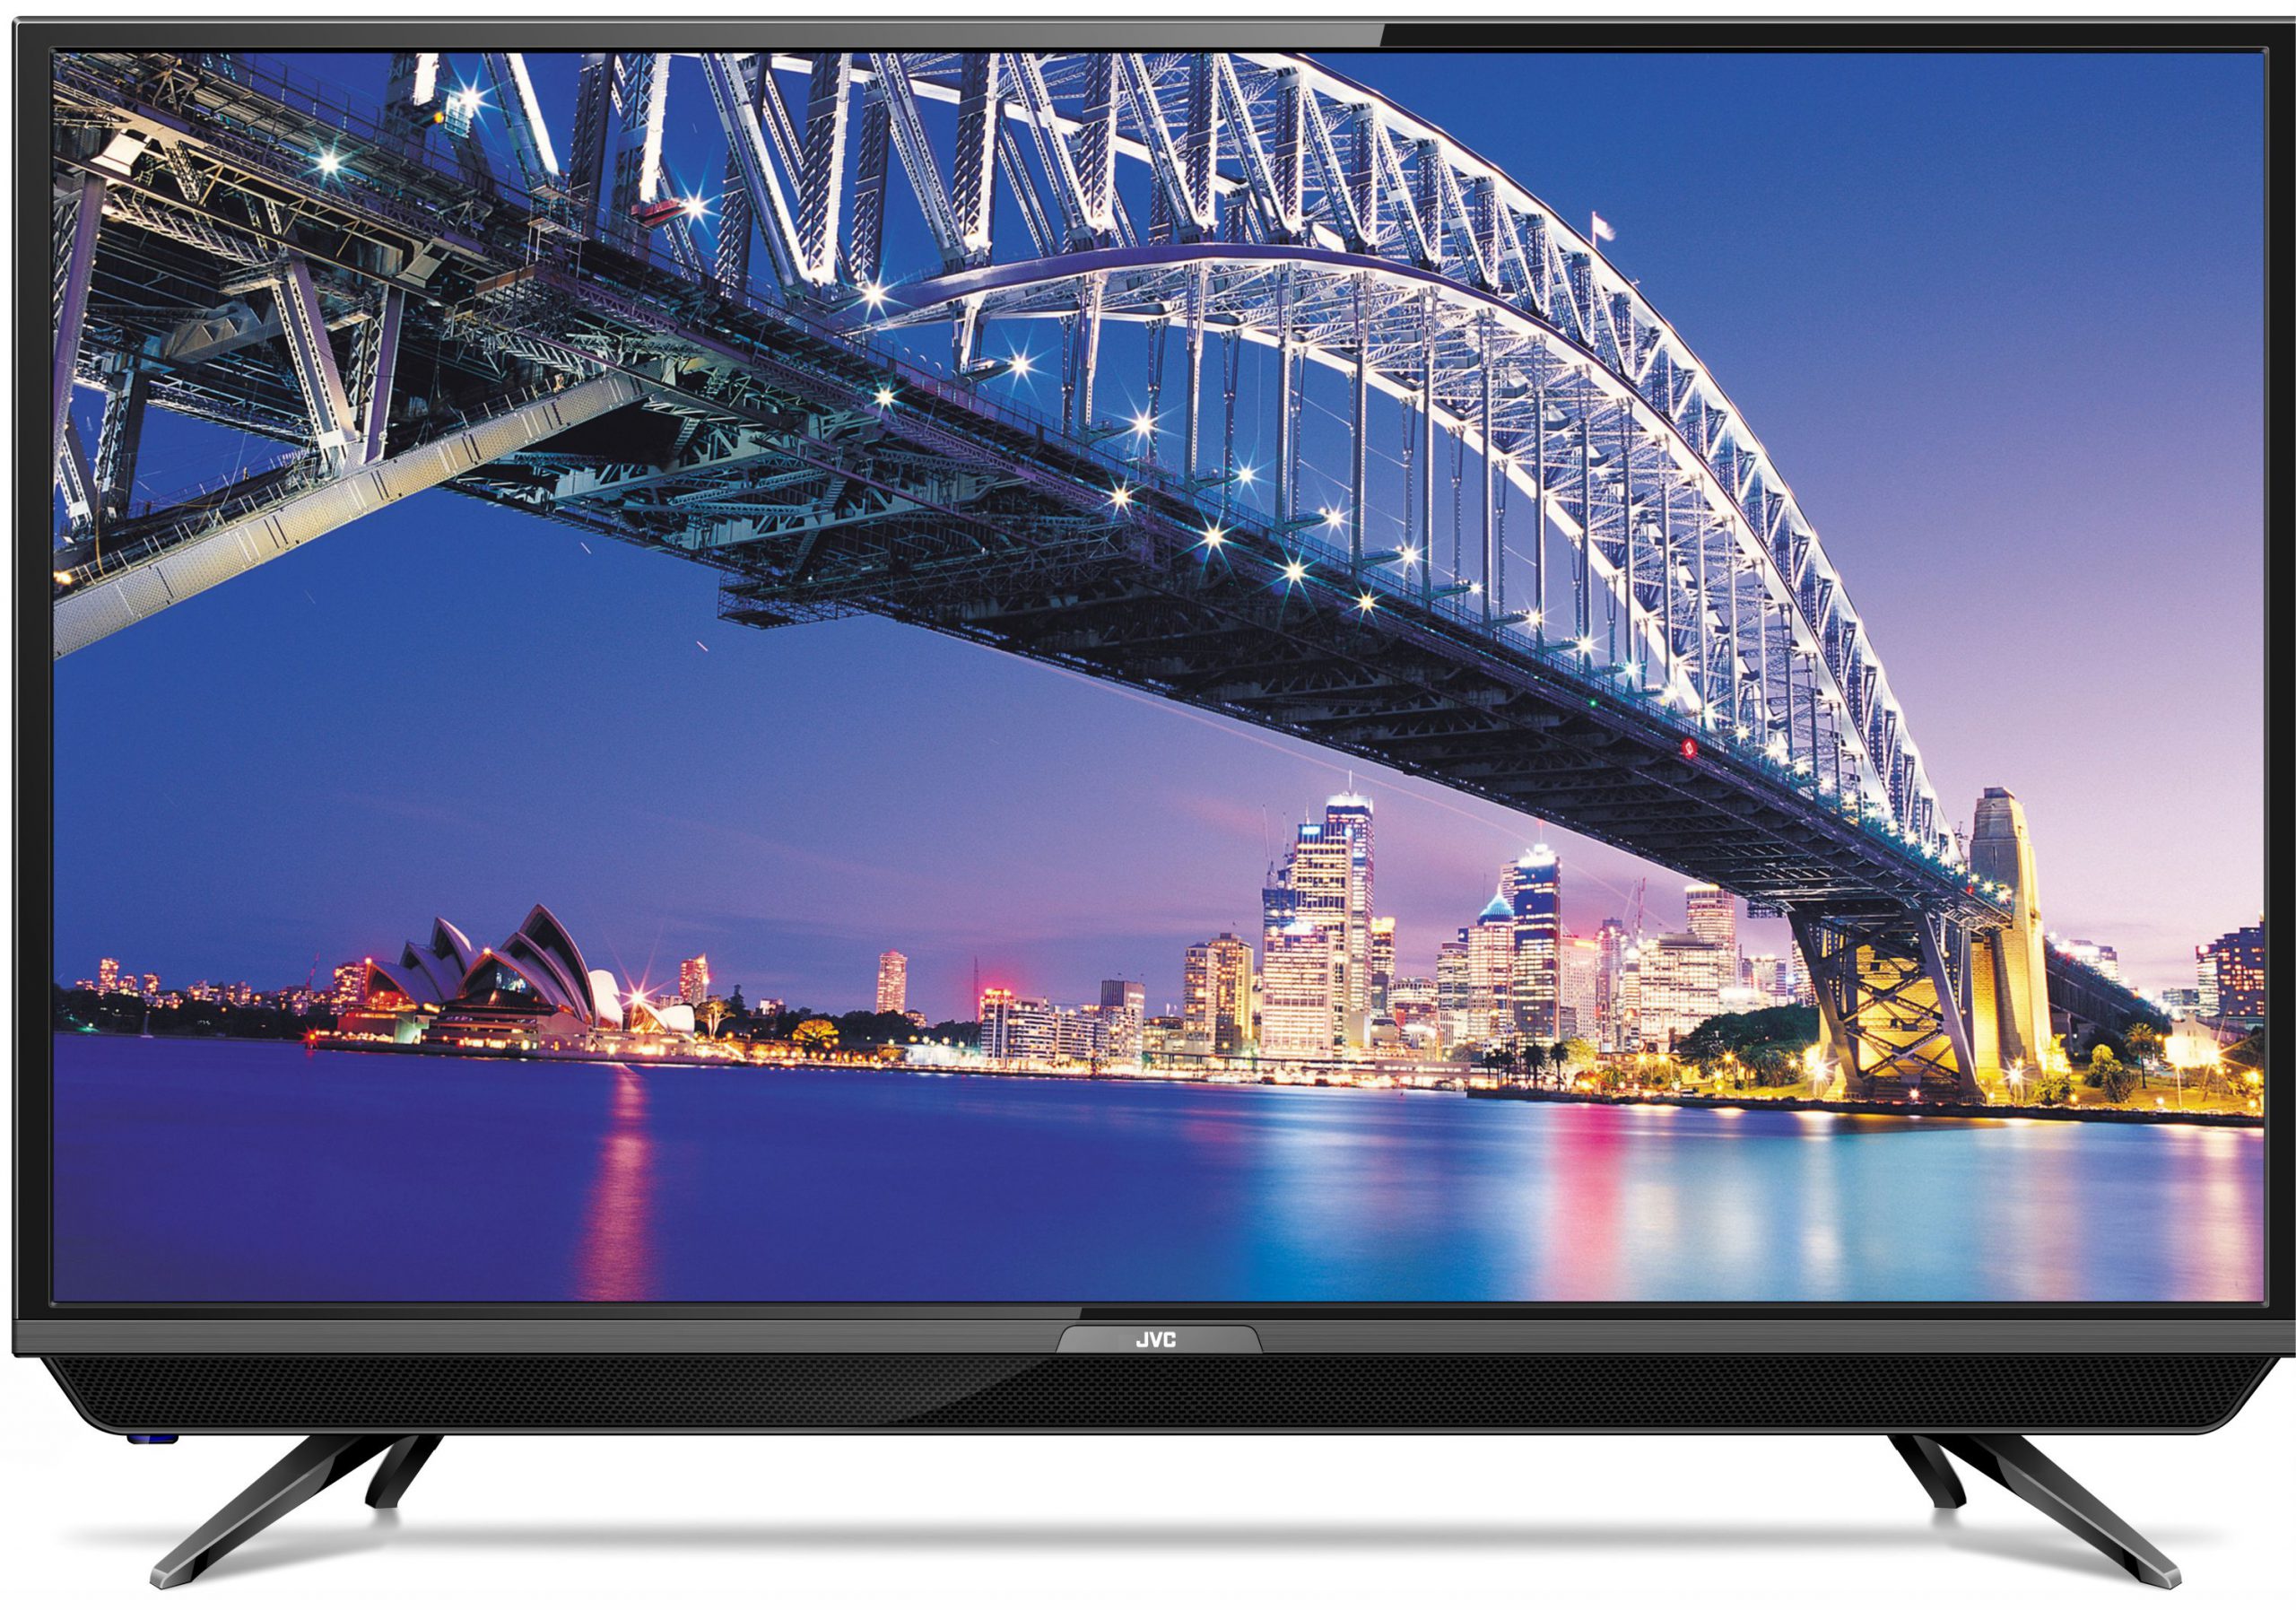 JVC 43N7105C 43-Inch 4K Smart LED TV With Quantum Backlight Launched in India, Priced at Rs. 24,999